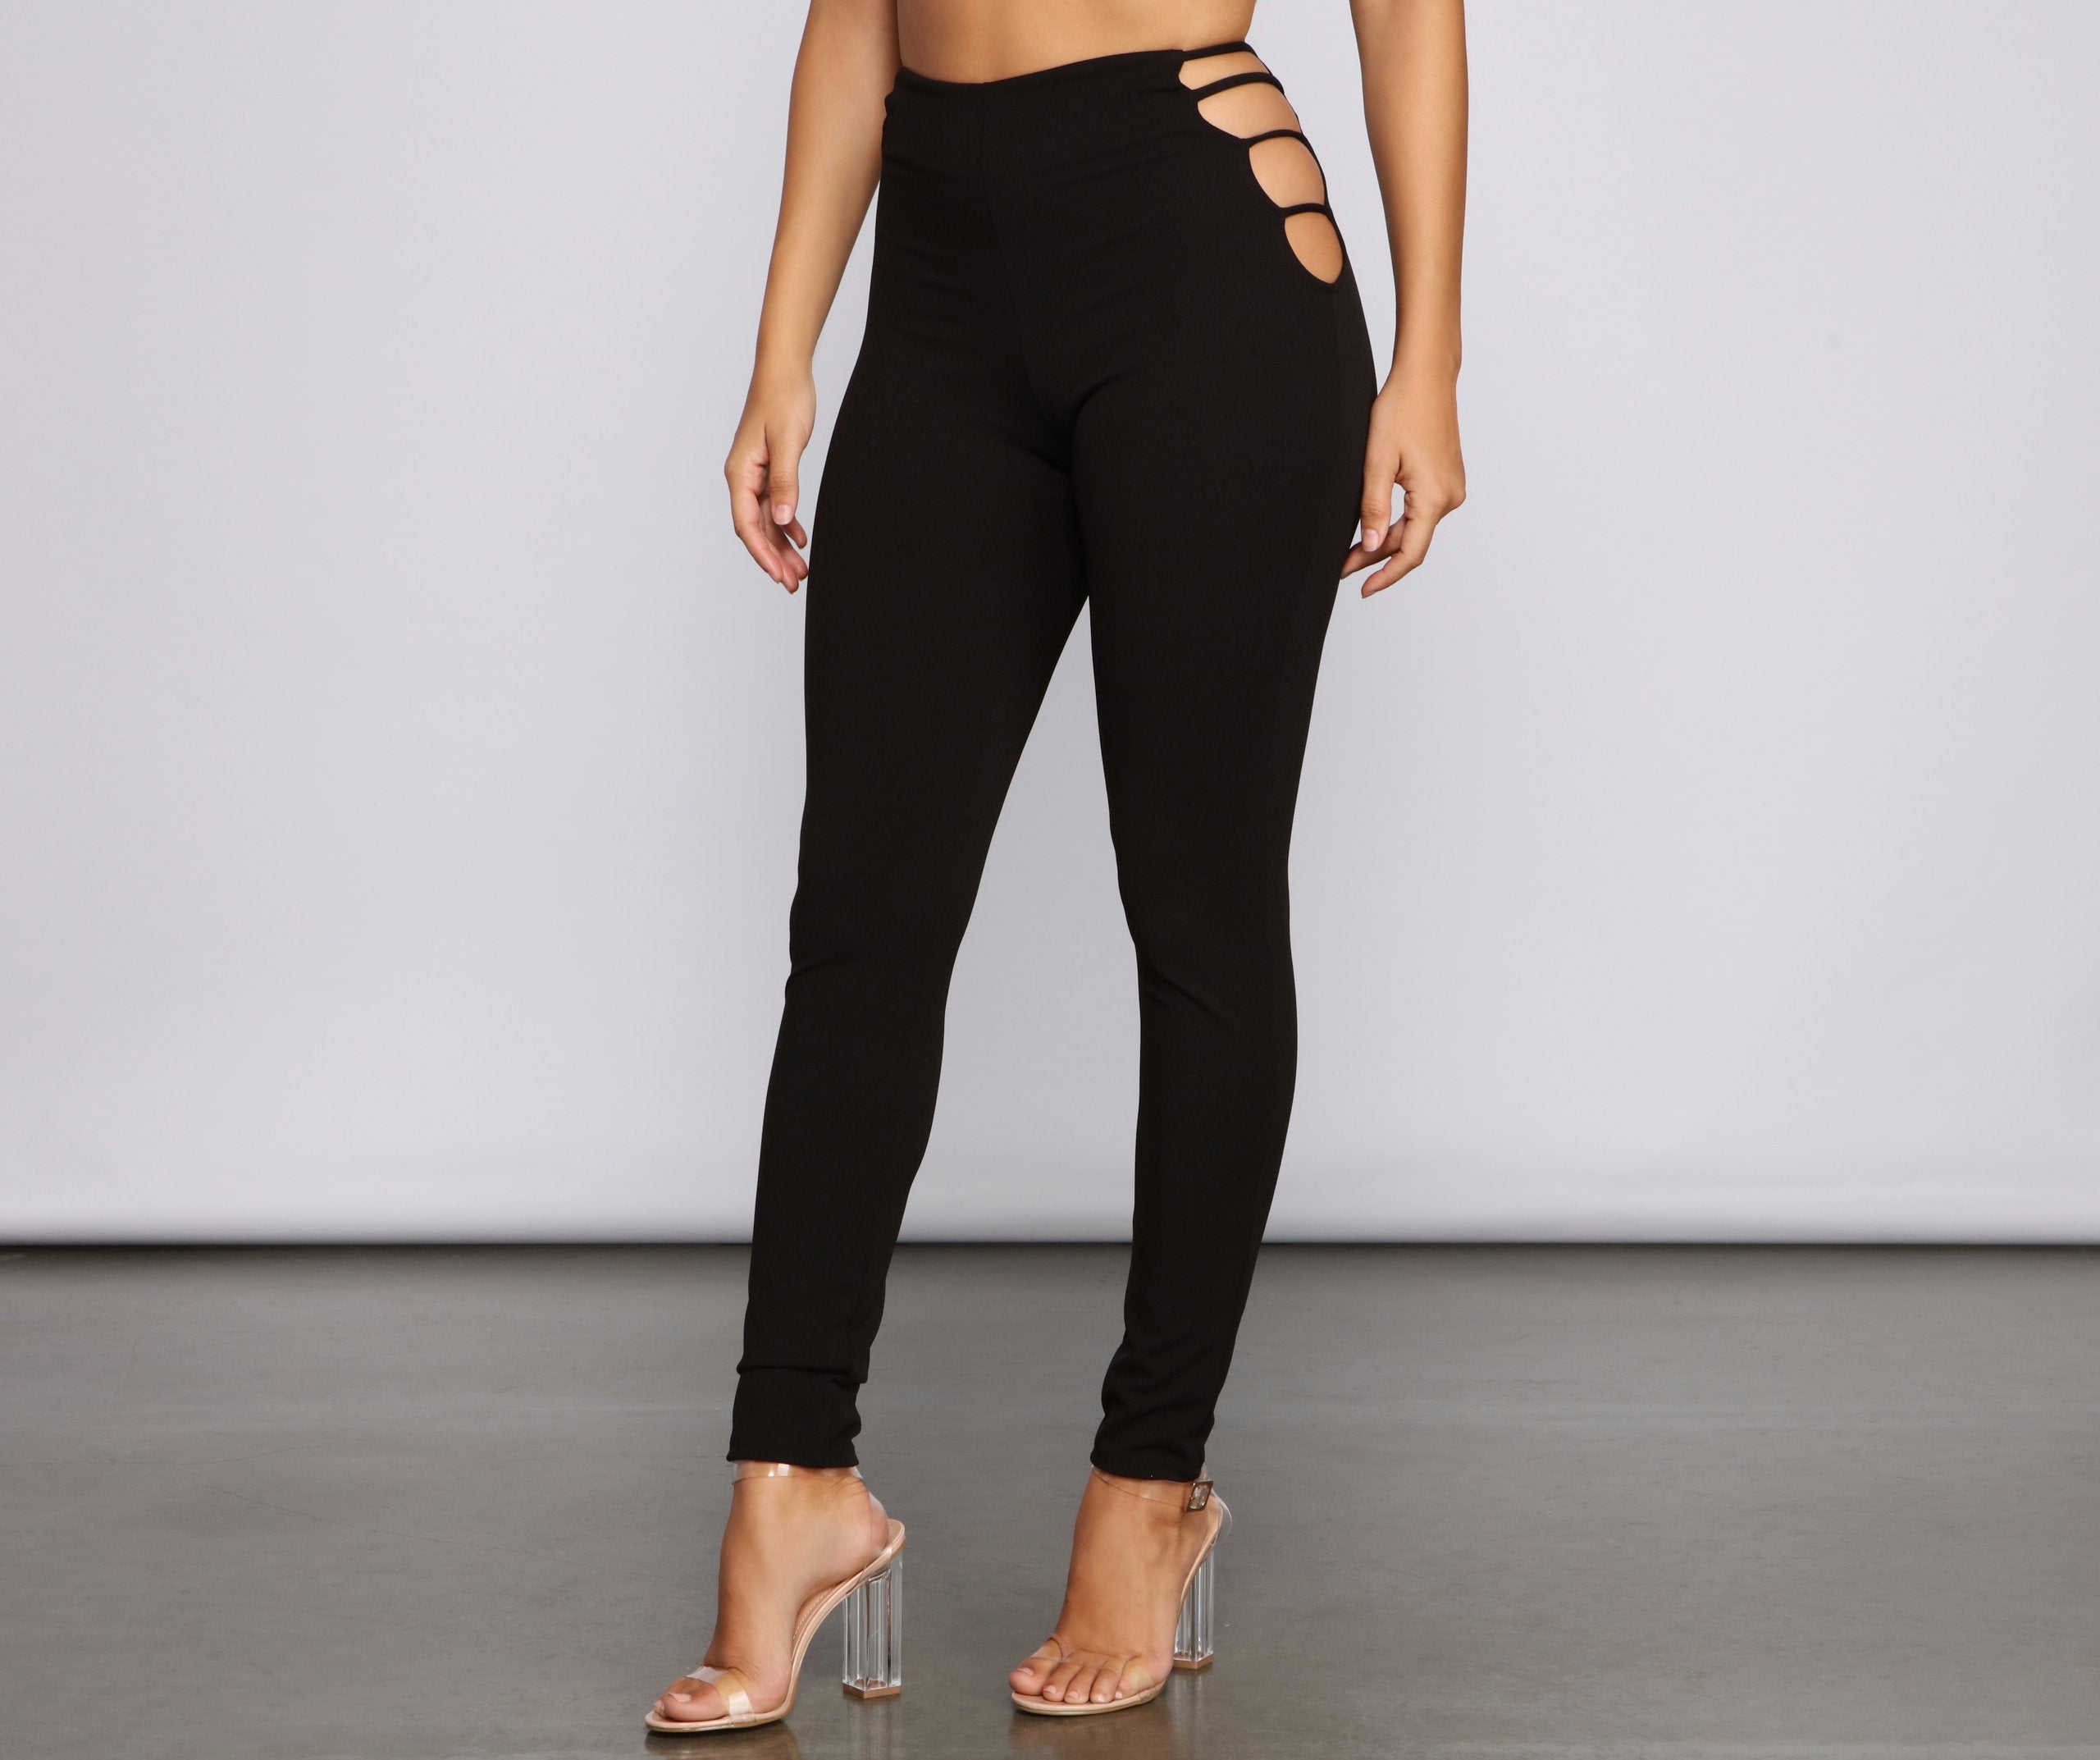 My Good Side Cutout Skinny Pants - Lady Occasions